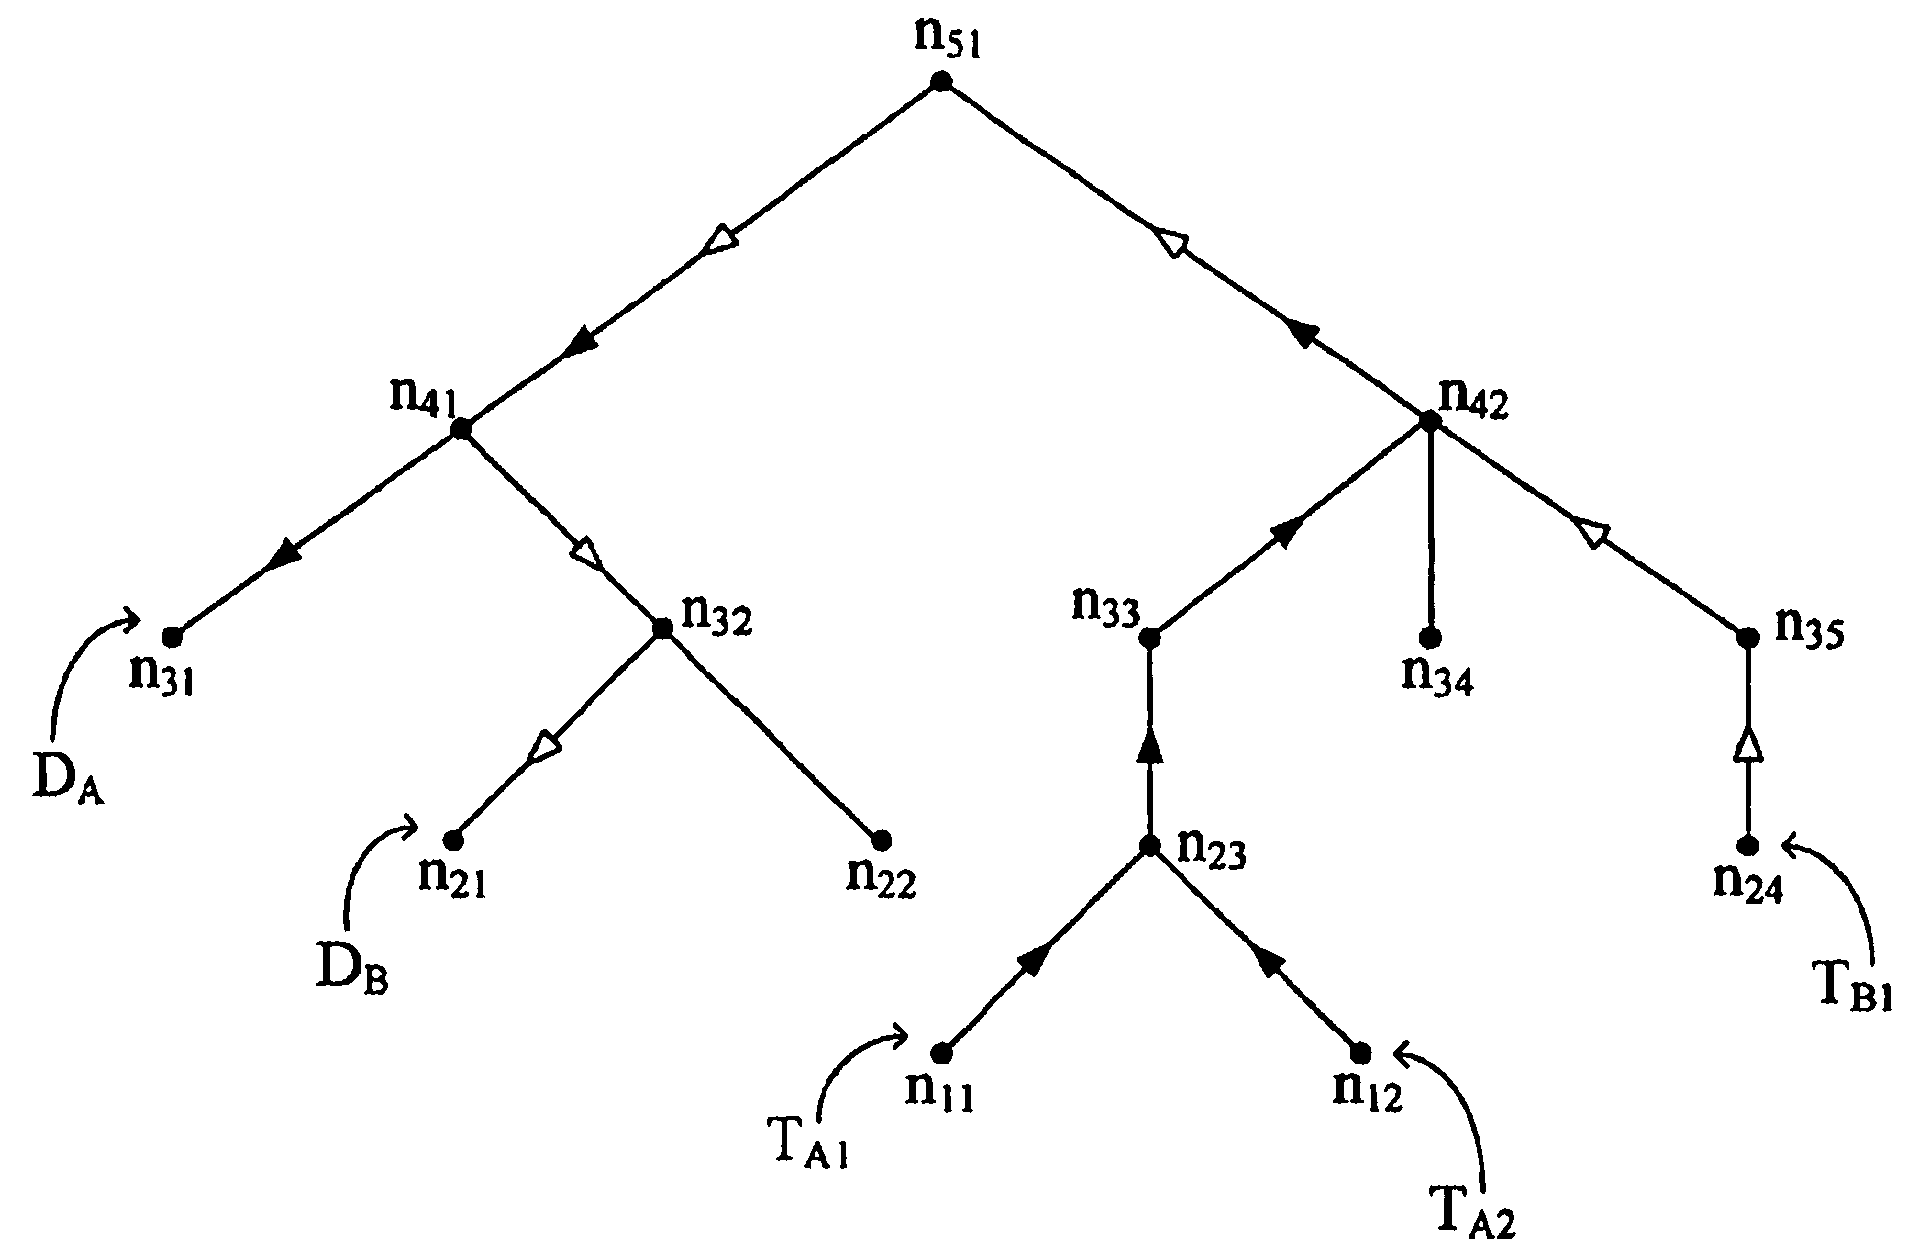 Reverse routing methods for integrated circuits having a hierarchical interconnect architecture